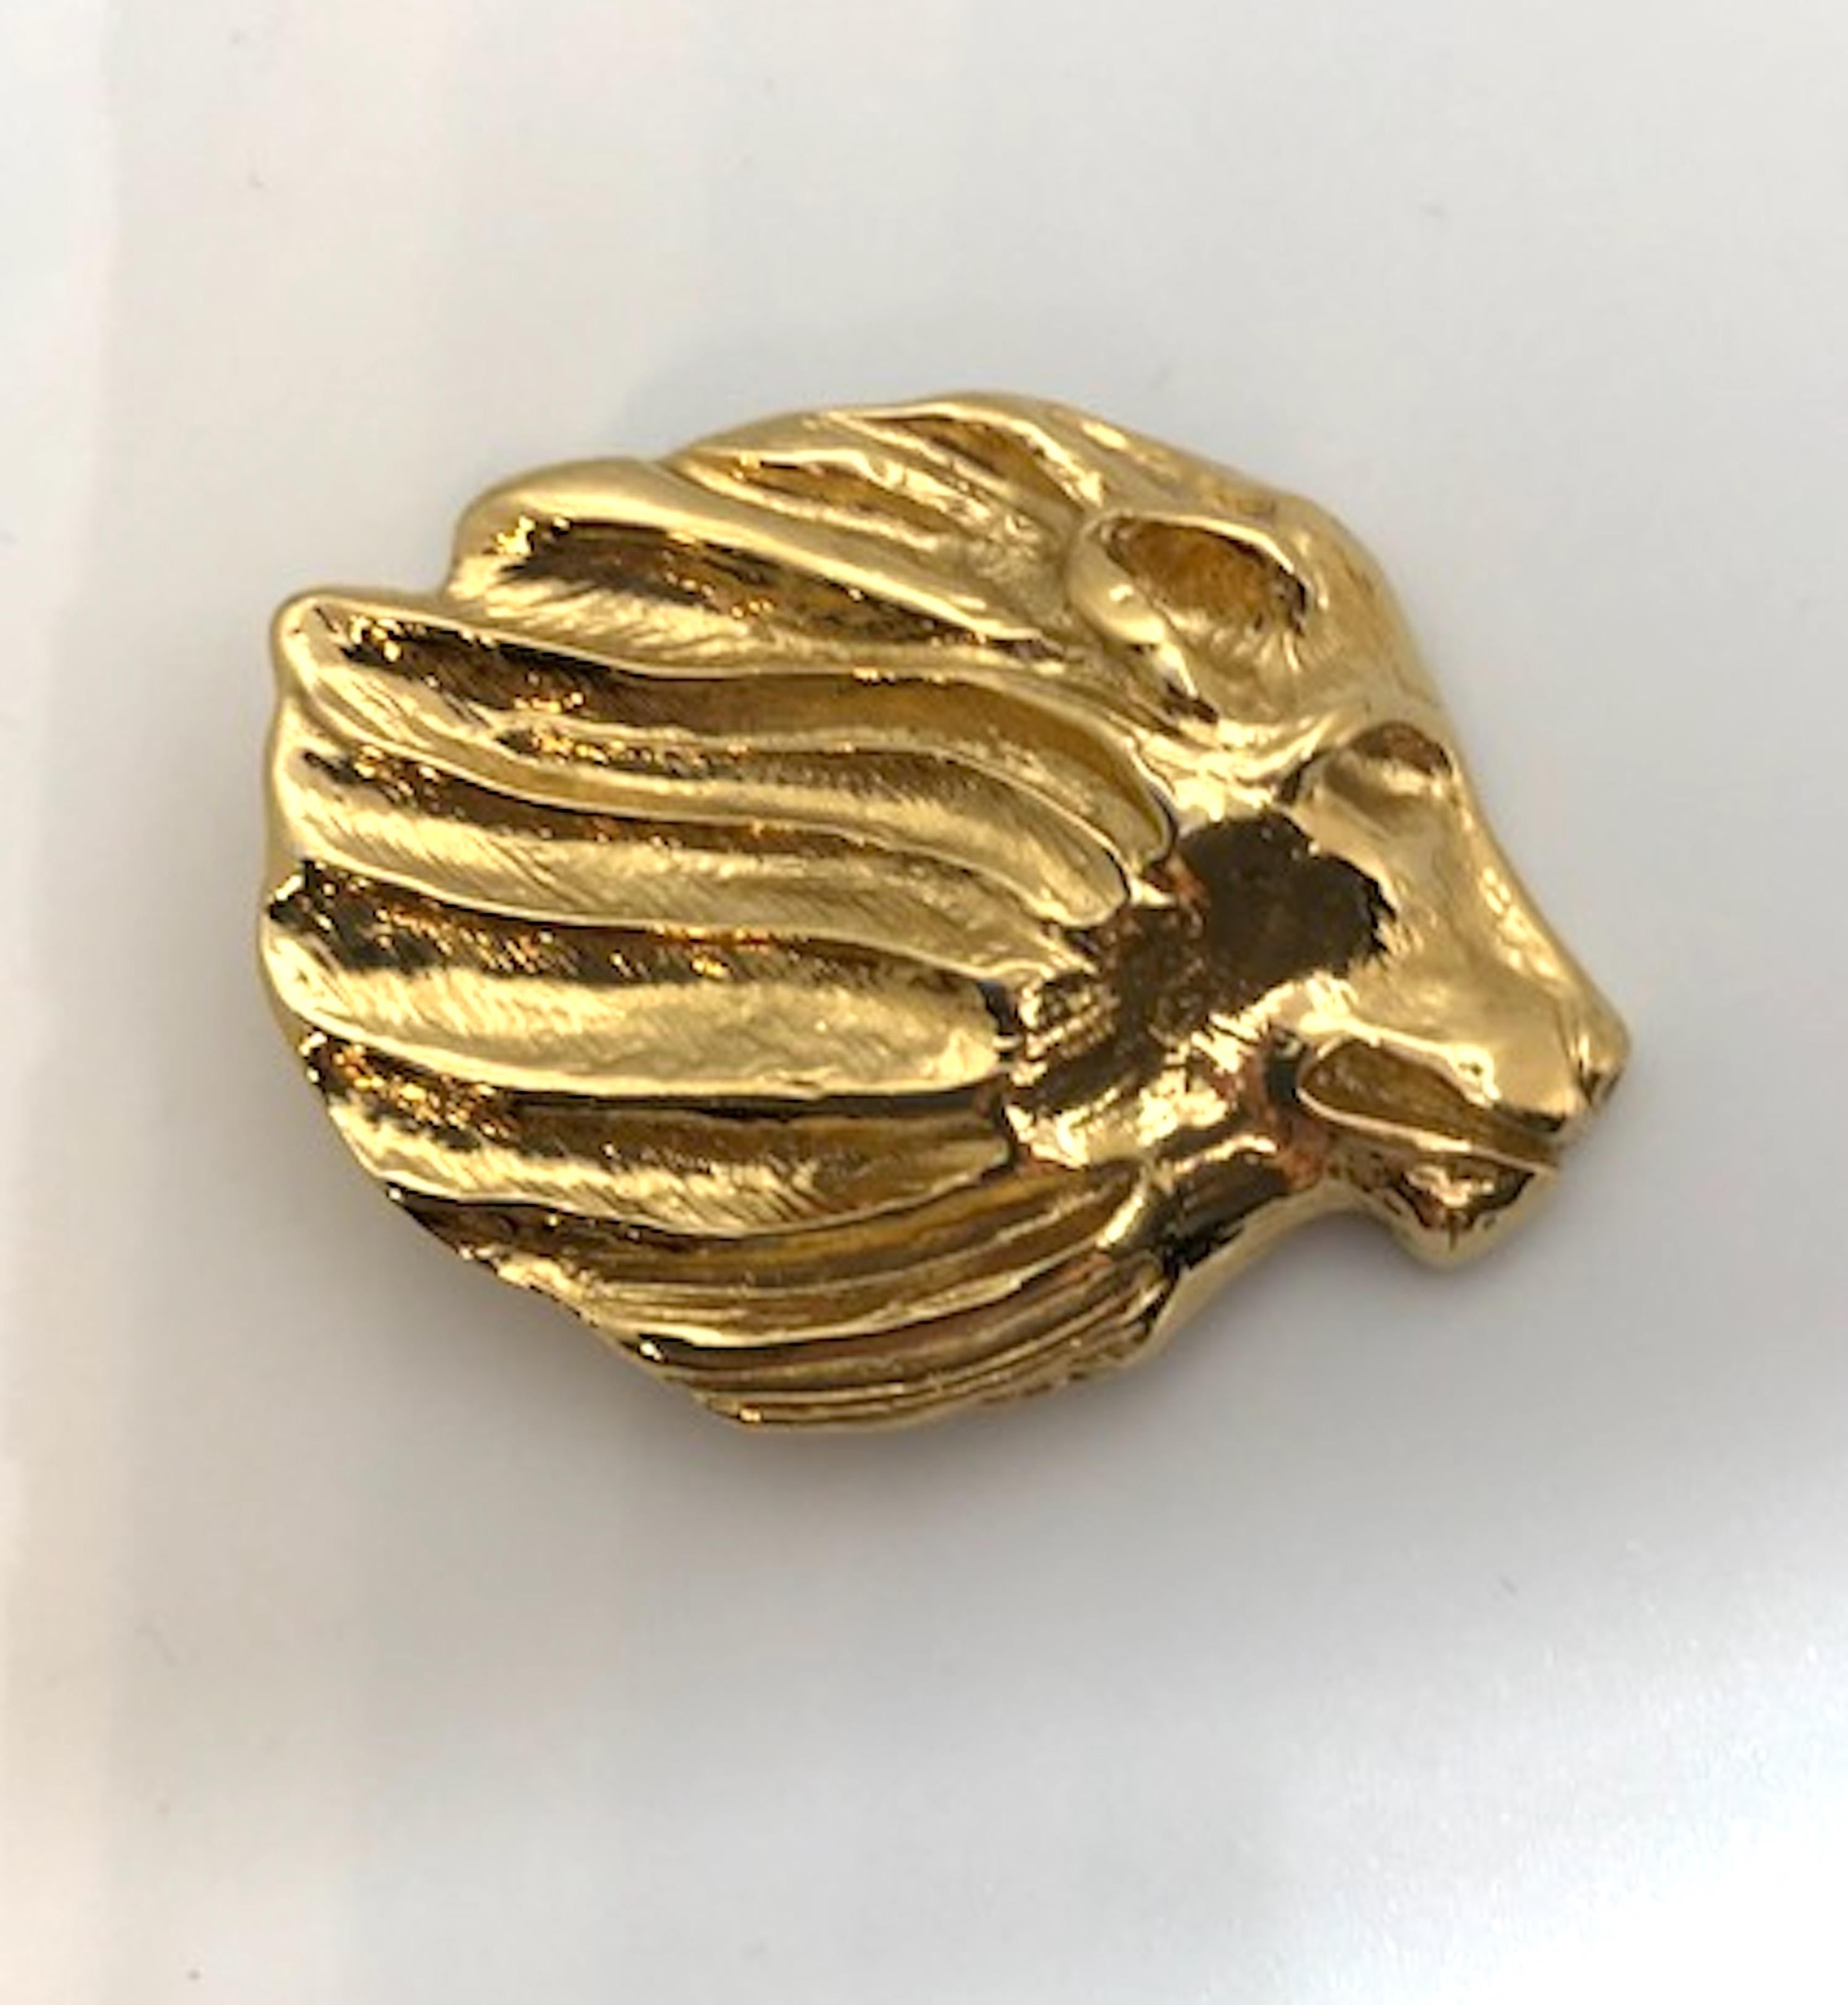 A beautifully crafted pair of 1980 / 90s Yves Saint Laurent lion face profile earrings. Each earring carved and cast separately. They are not identical. There is a right and left earring as they are mirror images meant to face each other when worn.